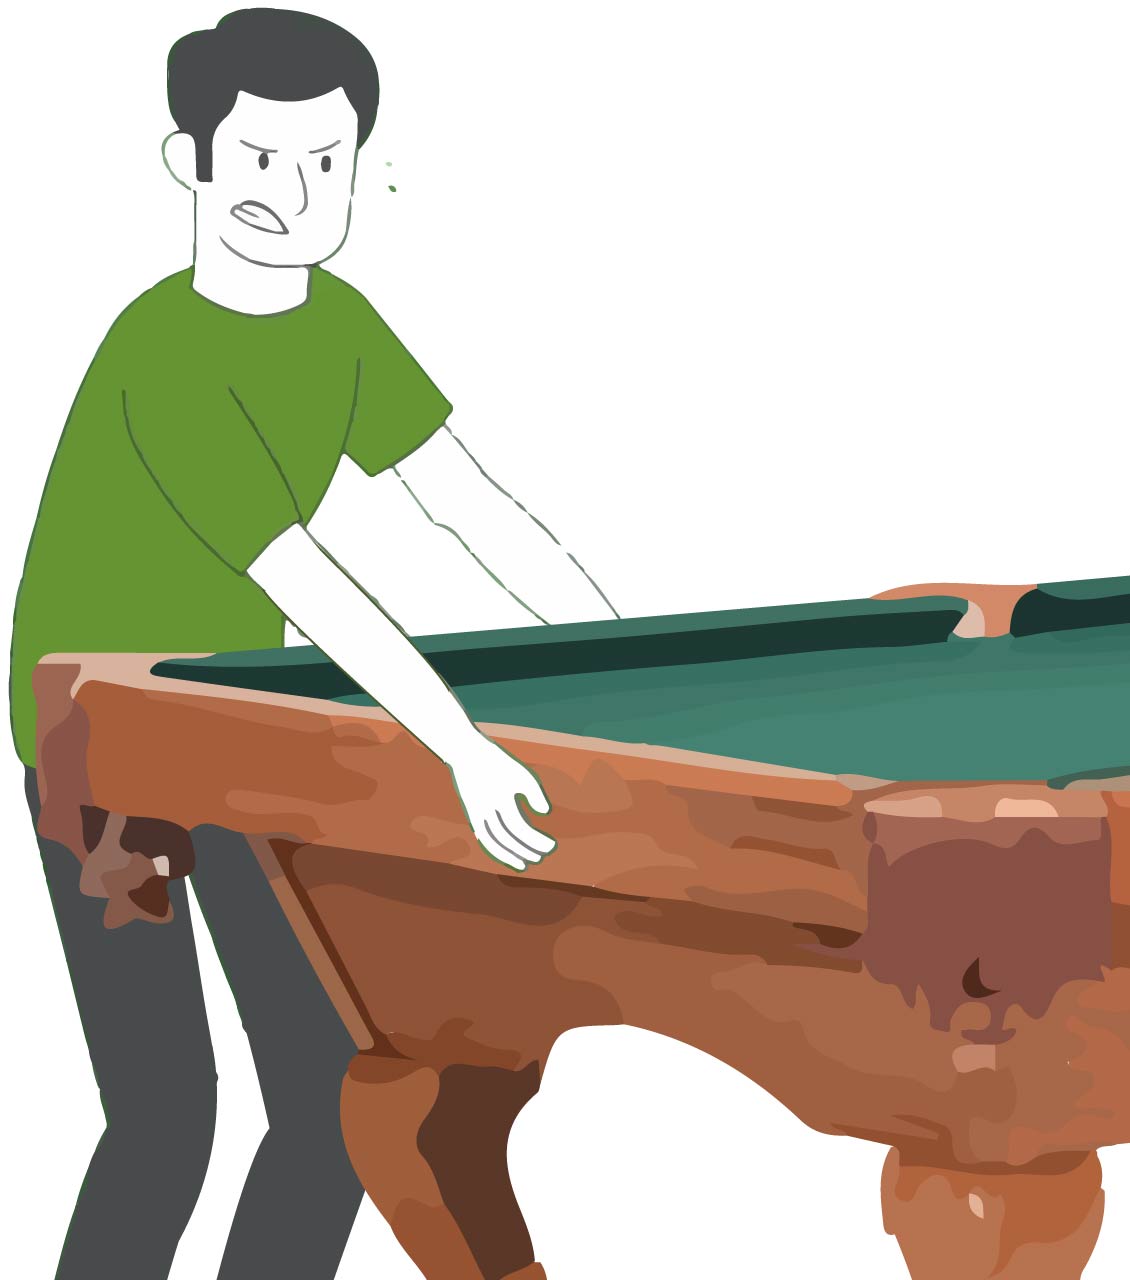 Nashville Pool Table Removal & Disposal Services